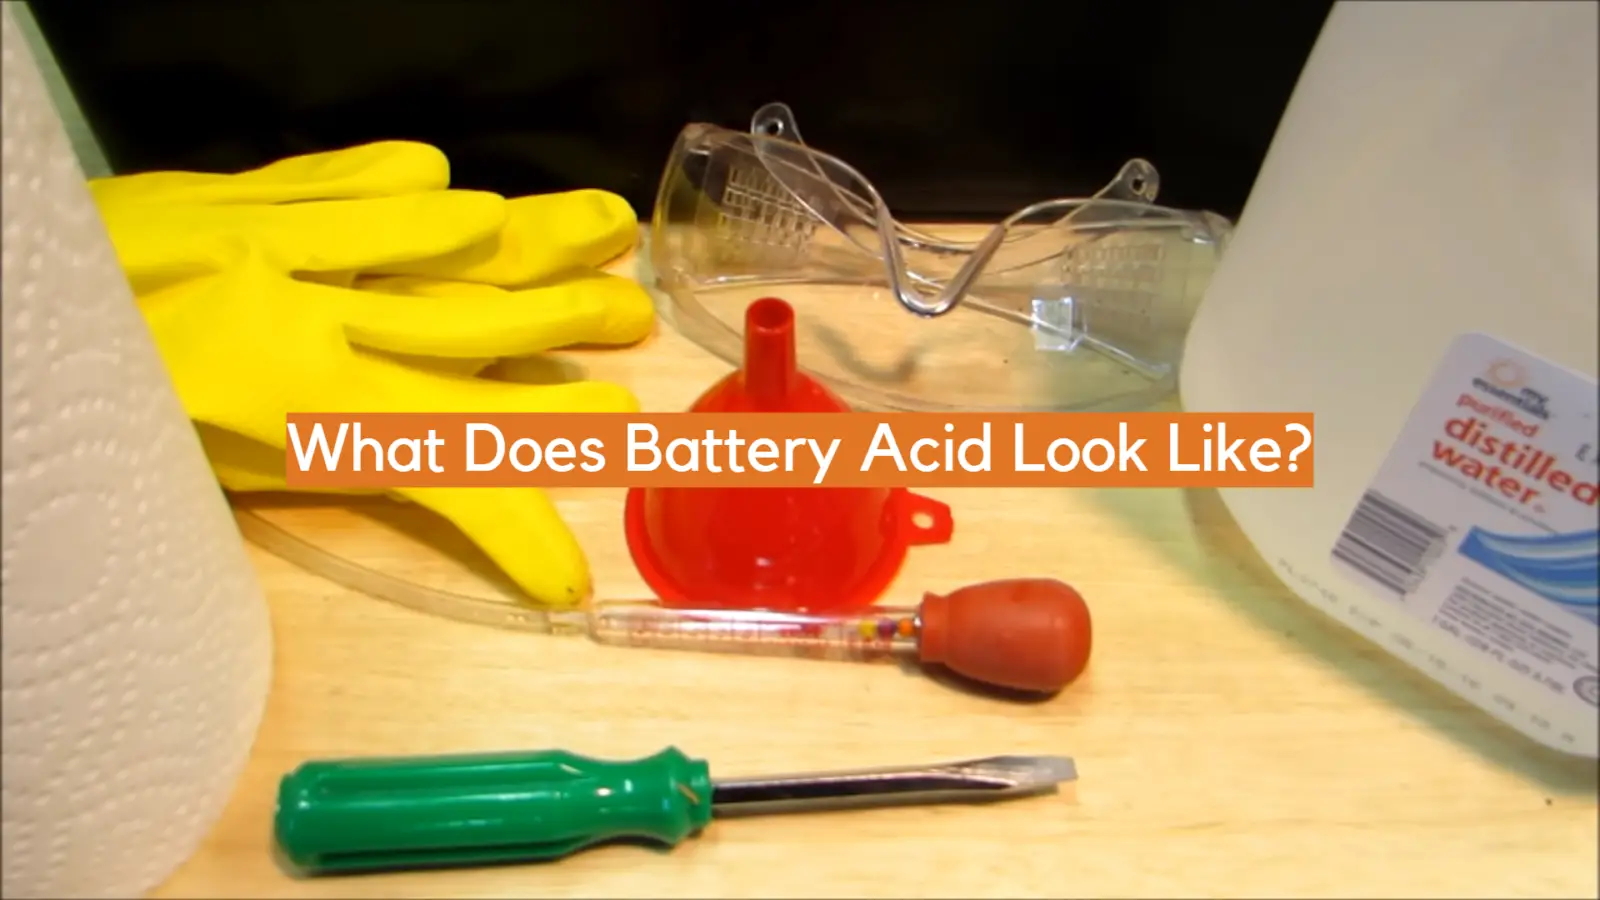 What Does Battery Acid Look Like?